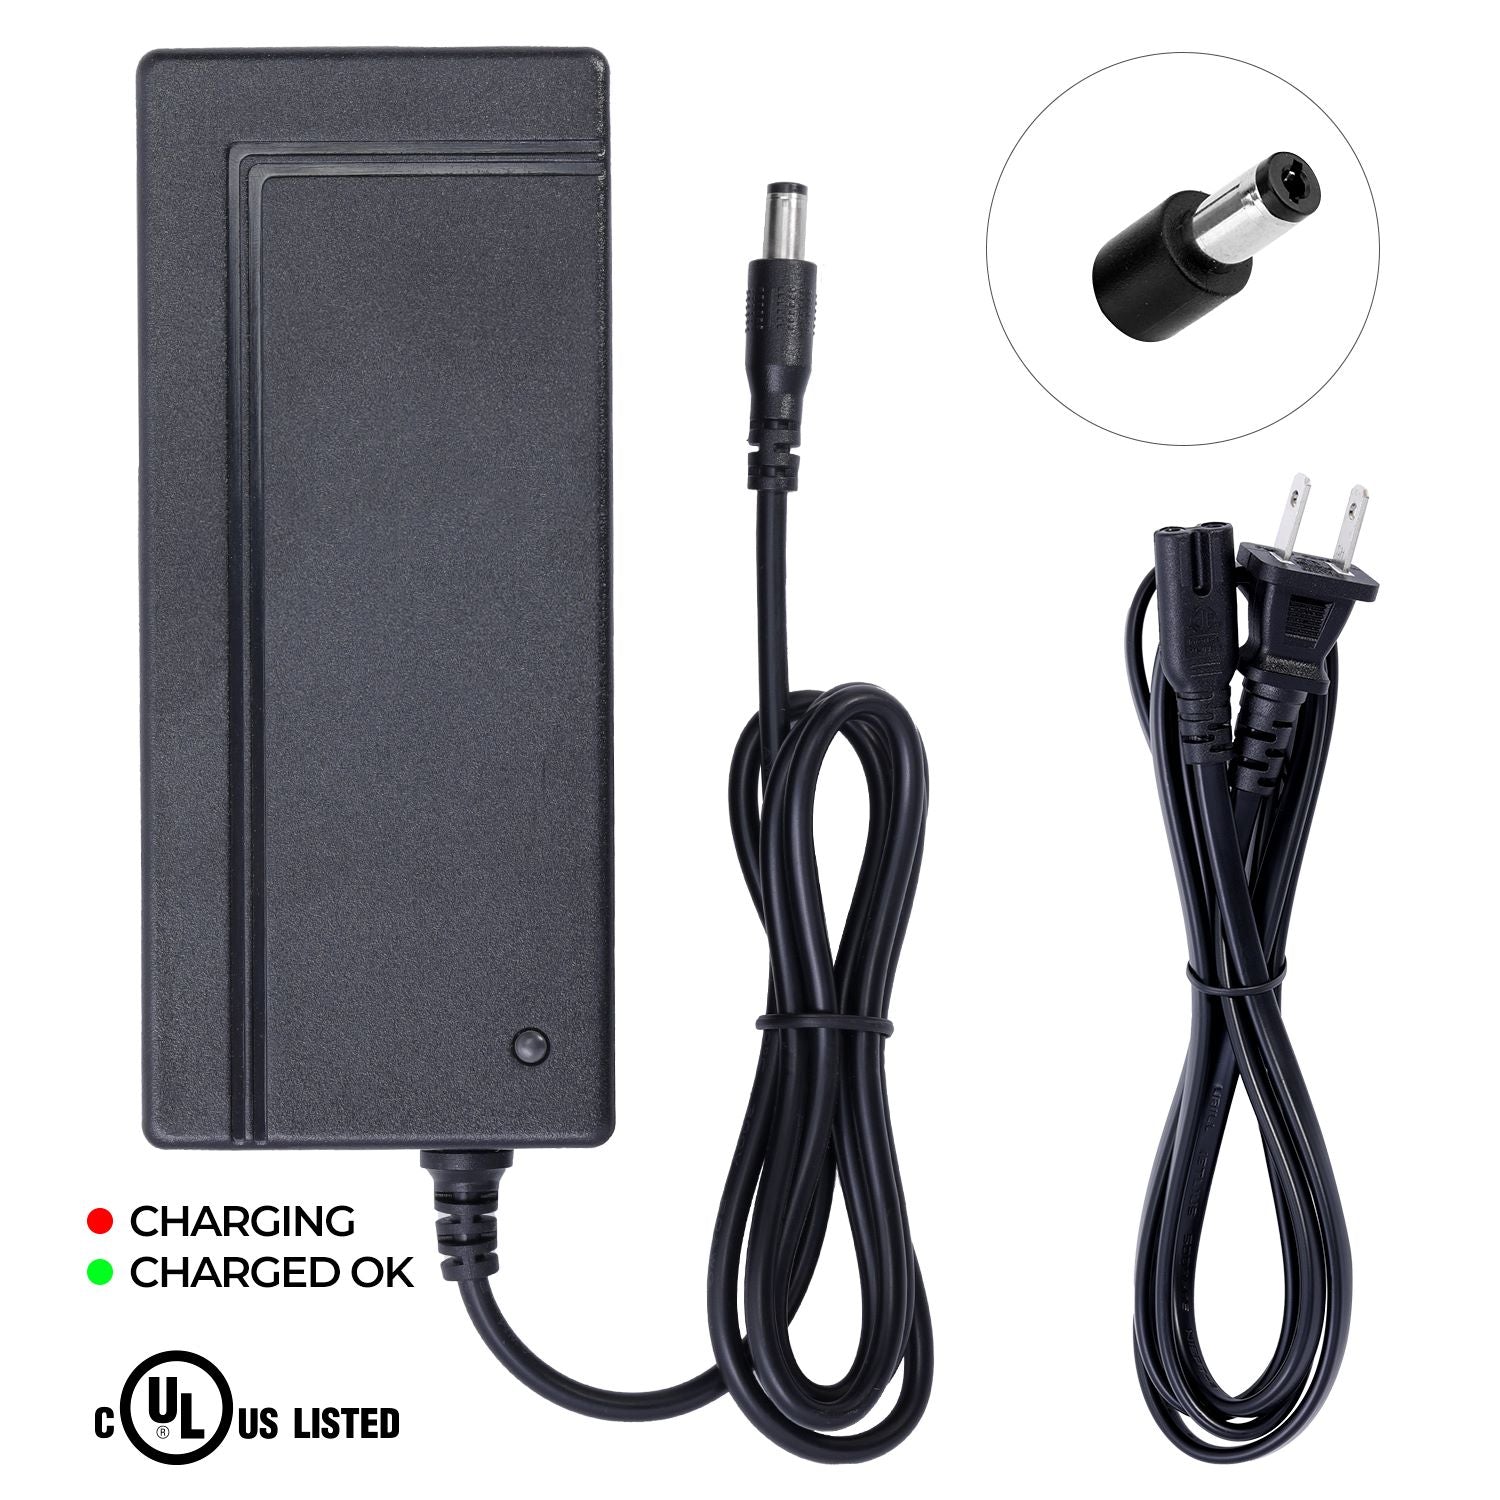 Charger for VoltBike Urban Electric Bike